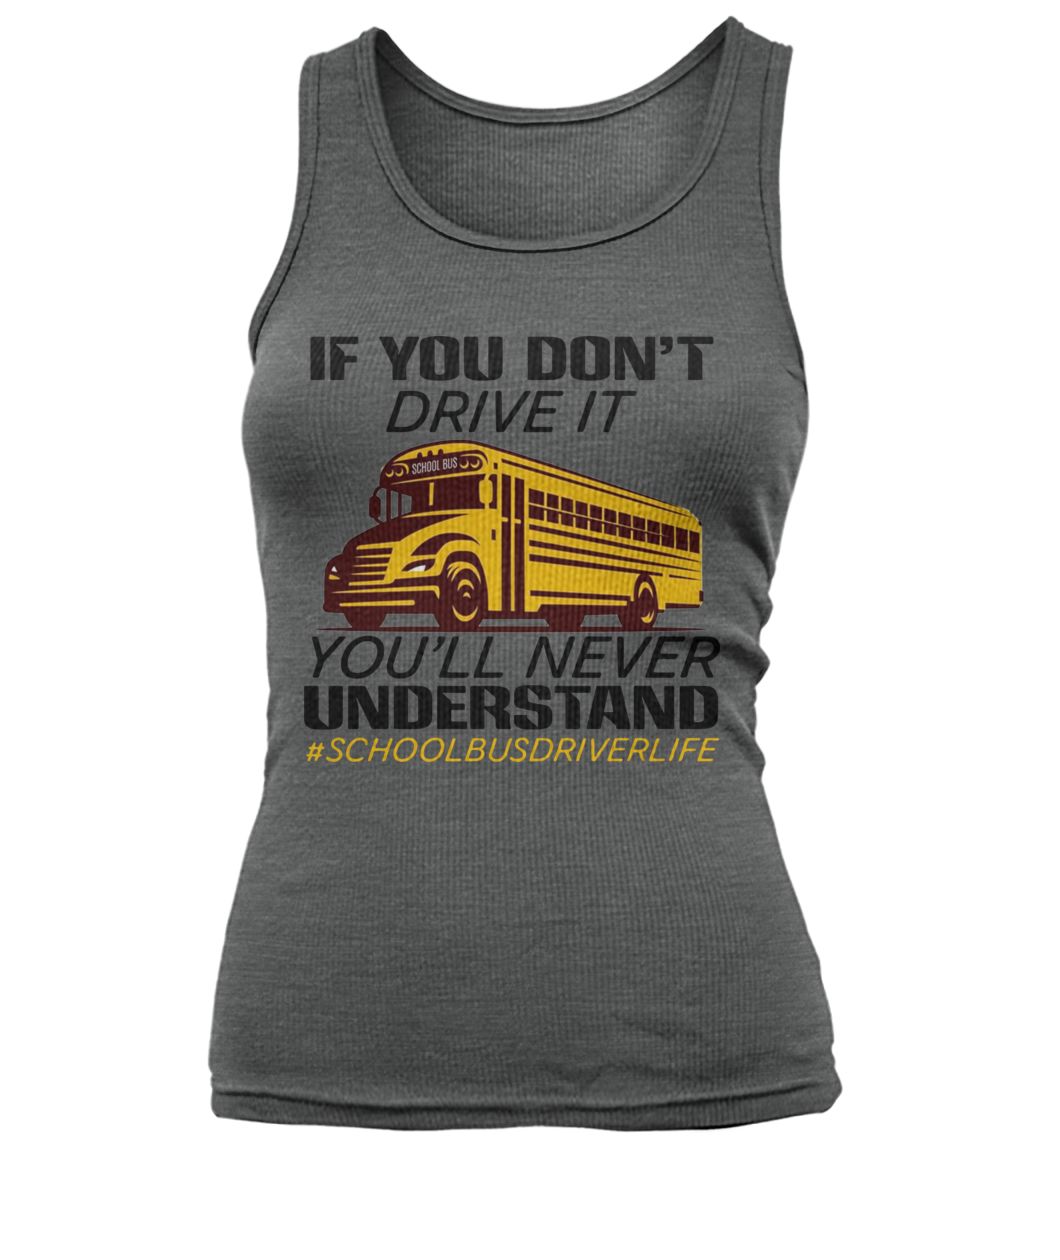 If you don't drive it you'll never understand #schoolbusdriverlife women's tank top